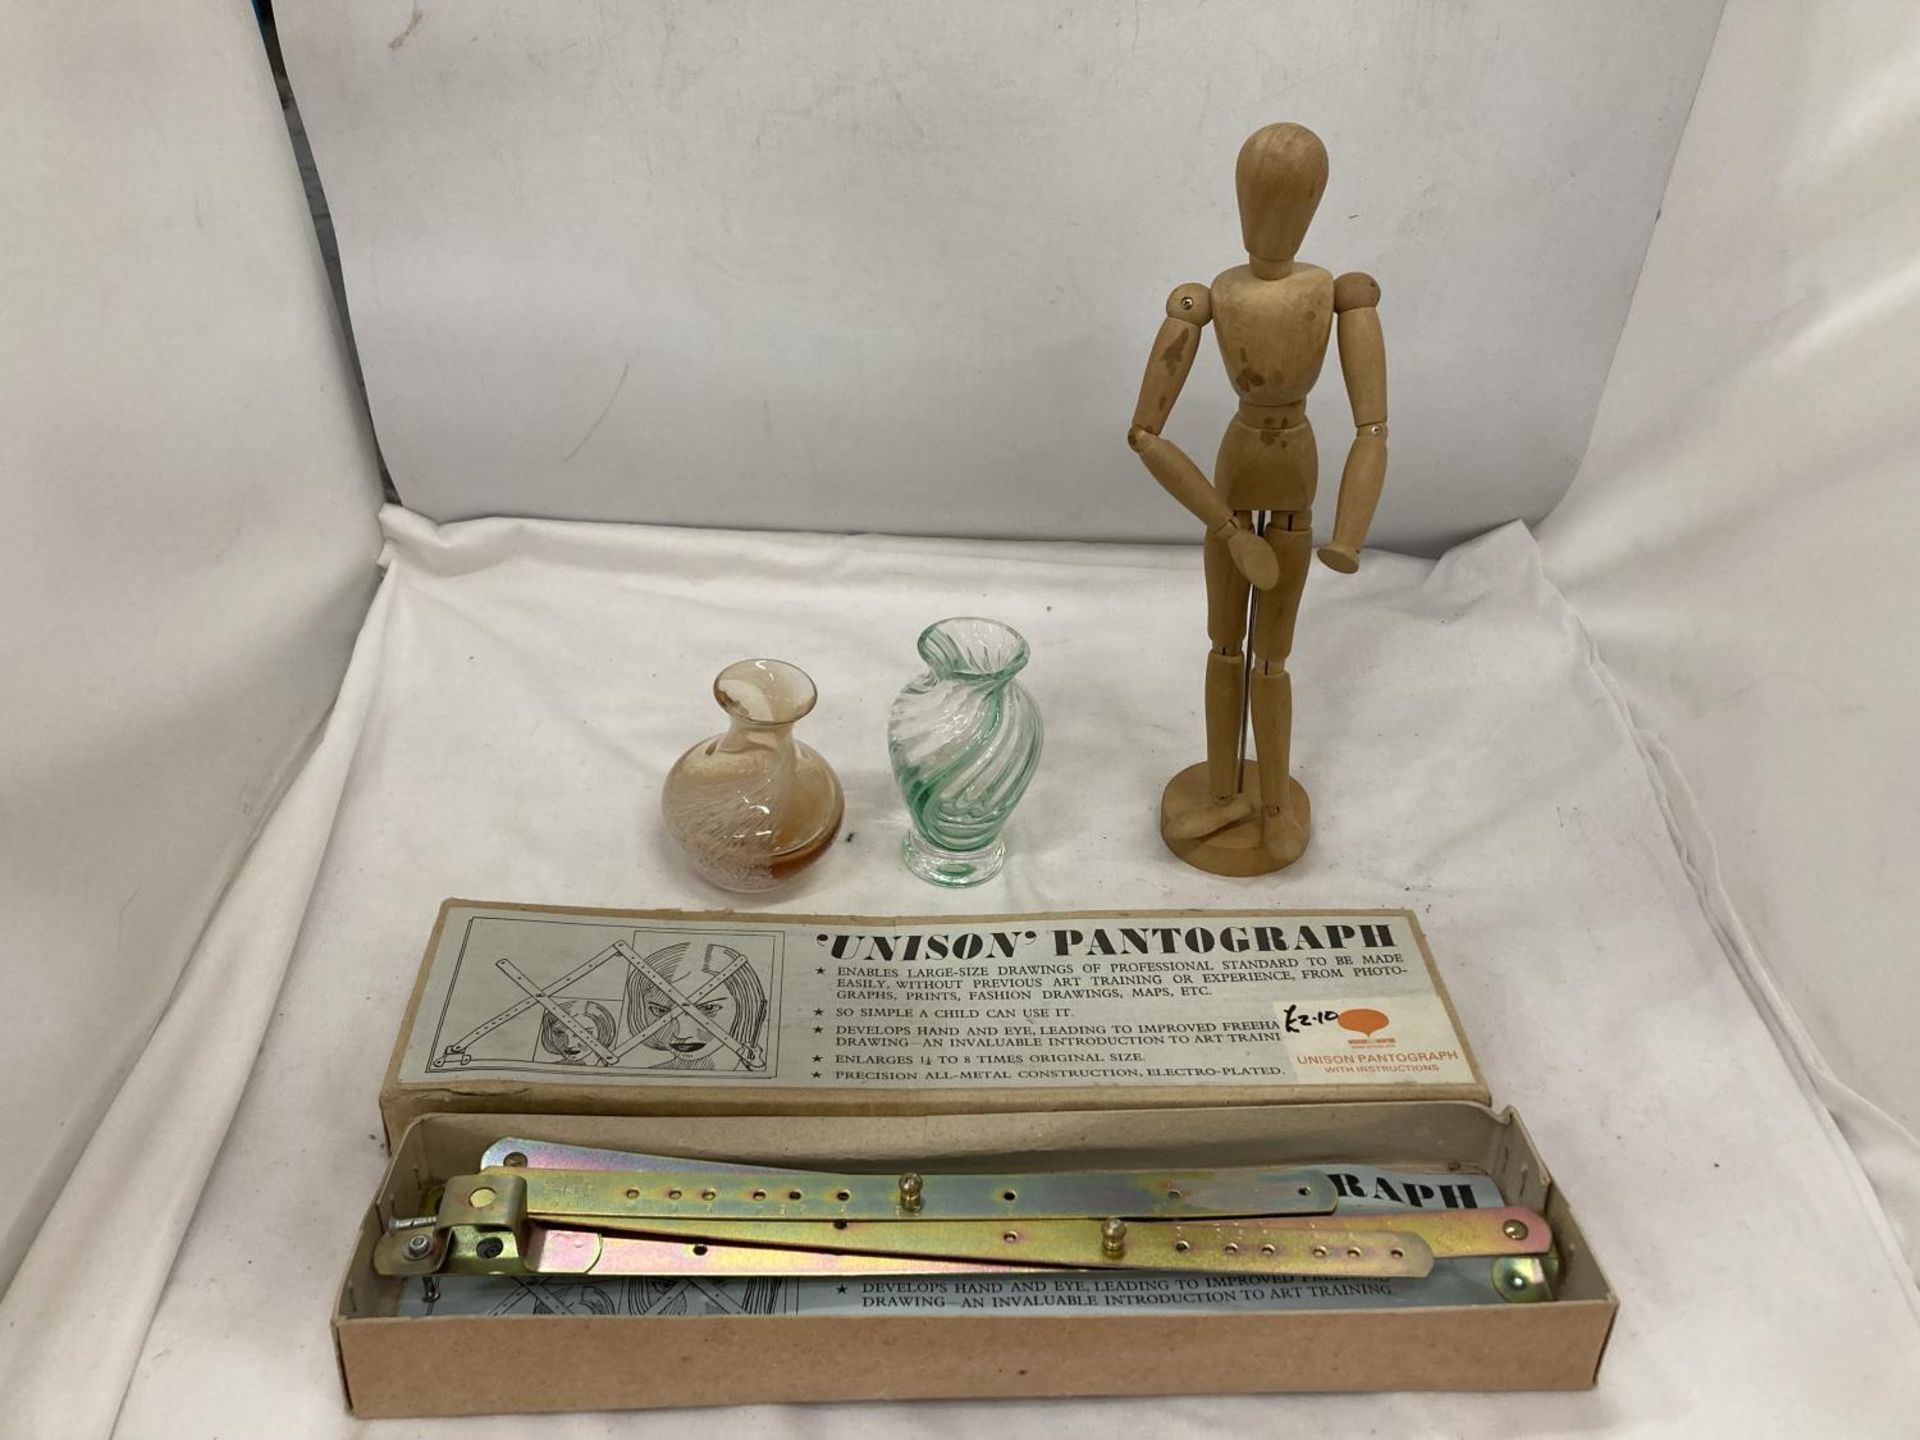 AN ARTICULATED WOODEN ARTISTS DUMMY PLUS A 'UNISON' PANTOGRAPH, BOXED